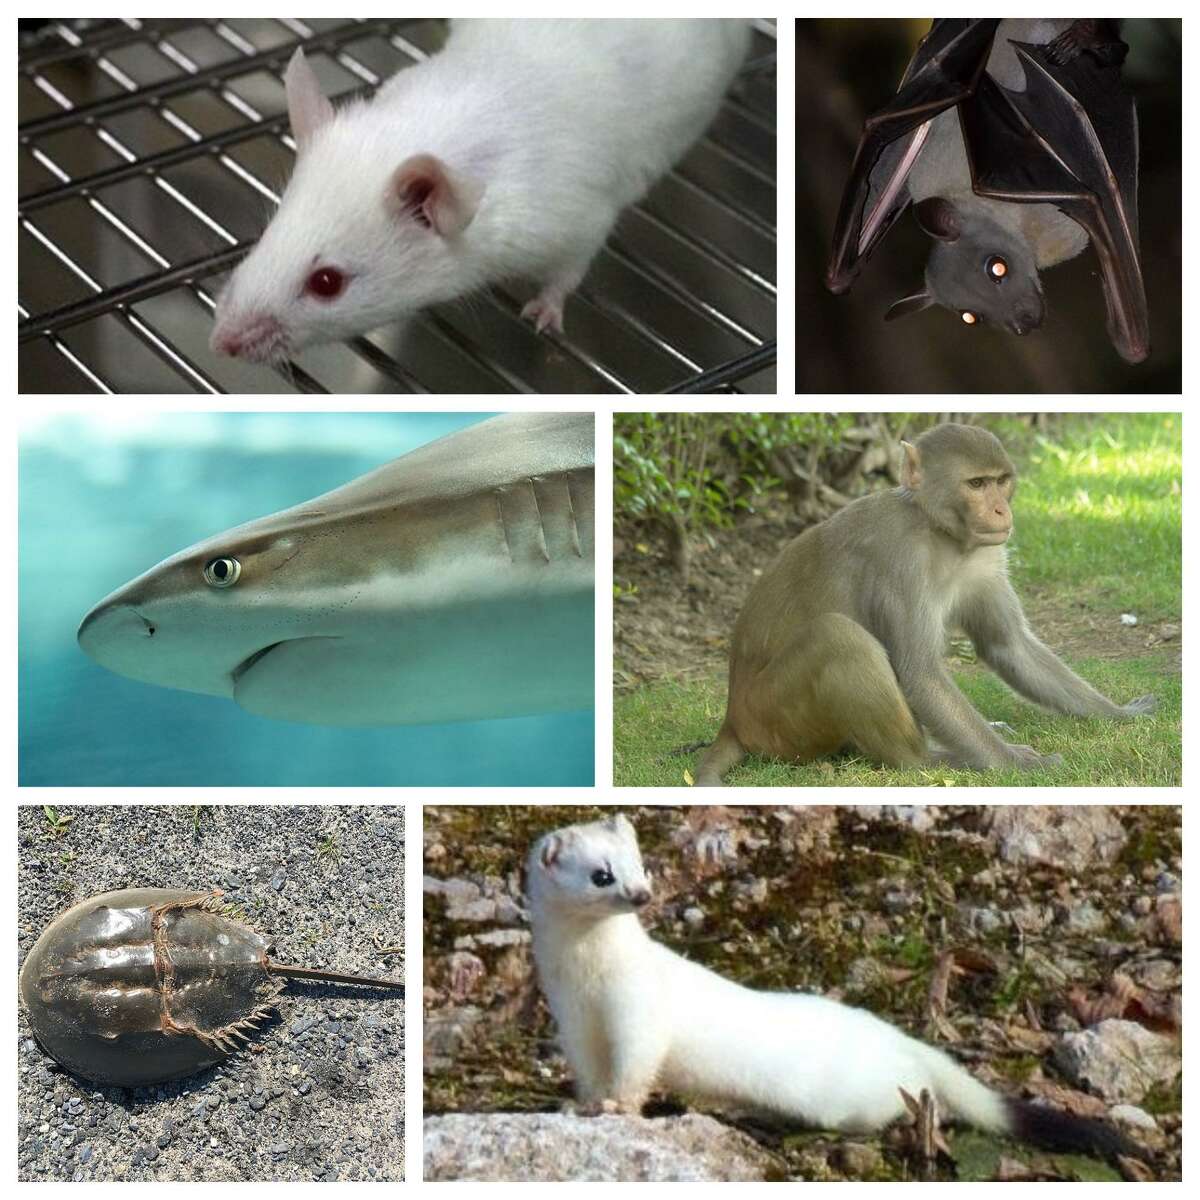 Six animal species being threatened by the COVID pandemic. Before we get to the meat of the matter, if you’re curious about the ethics of animal testing (a long-term and complex issue about which many people feel strongly) check out this piece from Stanford University examining both sides of the debate. With that preface stated, here are six animals impacted by the pandemic itself, and the attempt to cure and treat COVID-19: MinksThere have been few solid cases of animal-to-human transmission of the coronavirus, and minks are one example. As a result, mink farms have culled their stock, resulting in the deaths of many thousands of minks around the world. In the United States, as many as 8,000 minks in three states died from COVID-19 infections after workers at farms passed the disease to the animals. Veterinarians said they do not believe humans were at risk from catching the virus from the animals in this case.